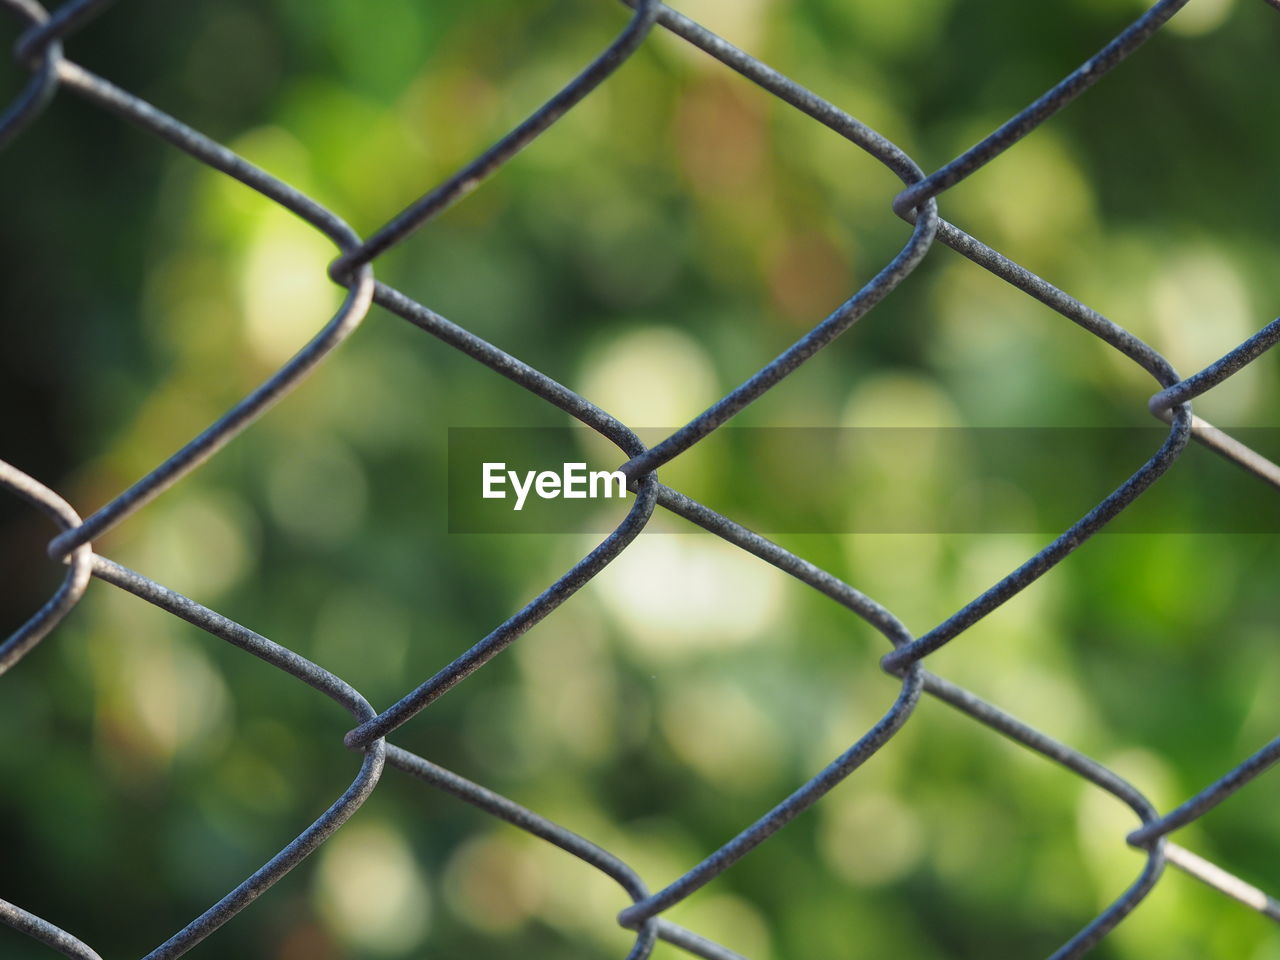 FULL FRAME SHOT OF CHAINLINK FENCE IN WIRE